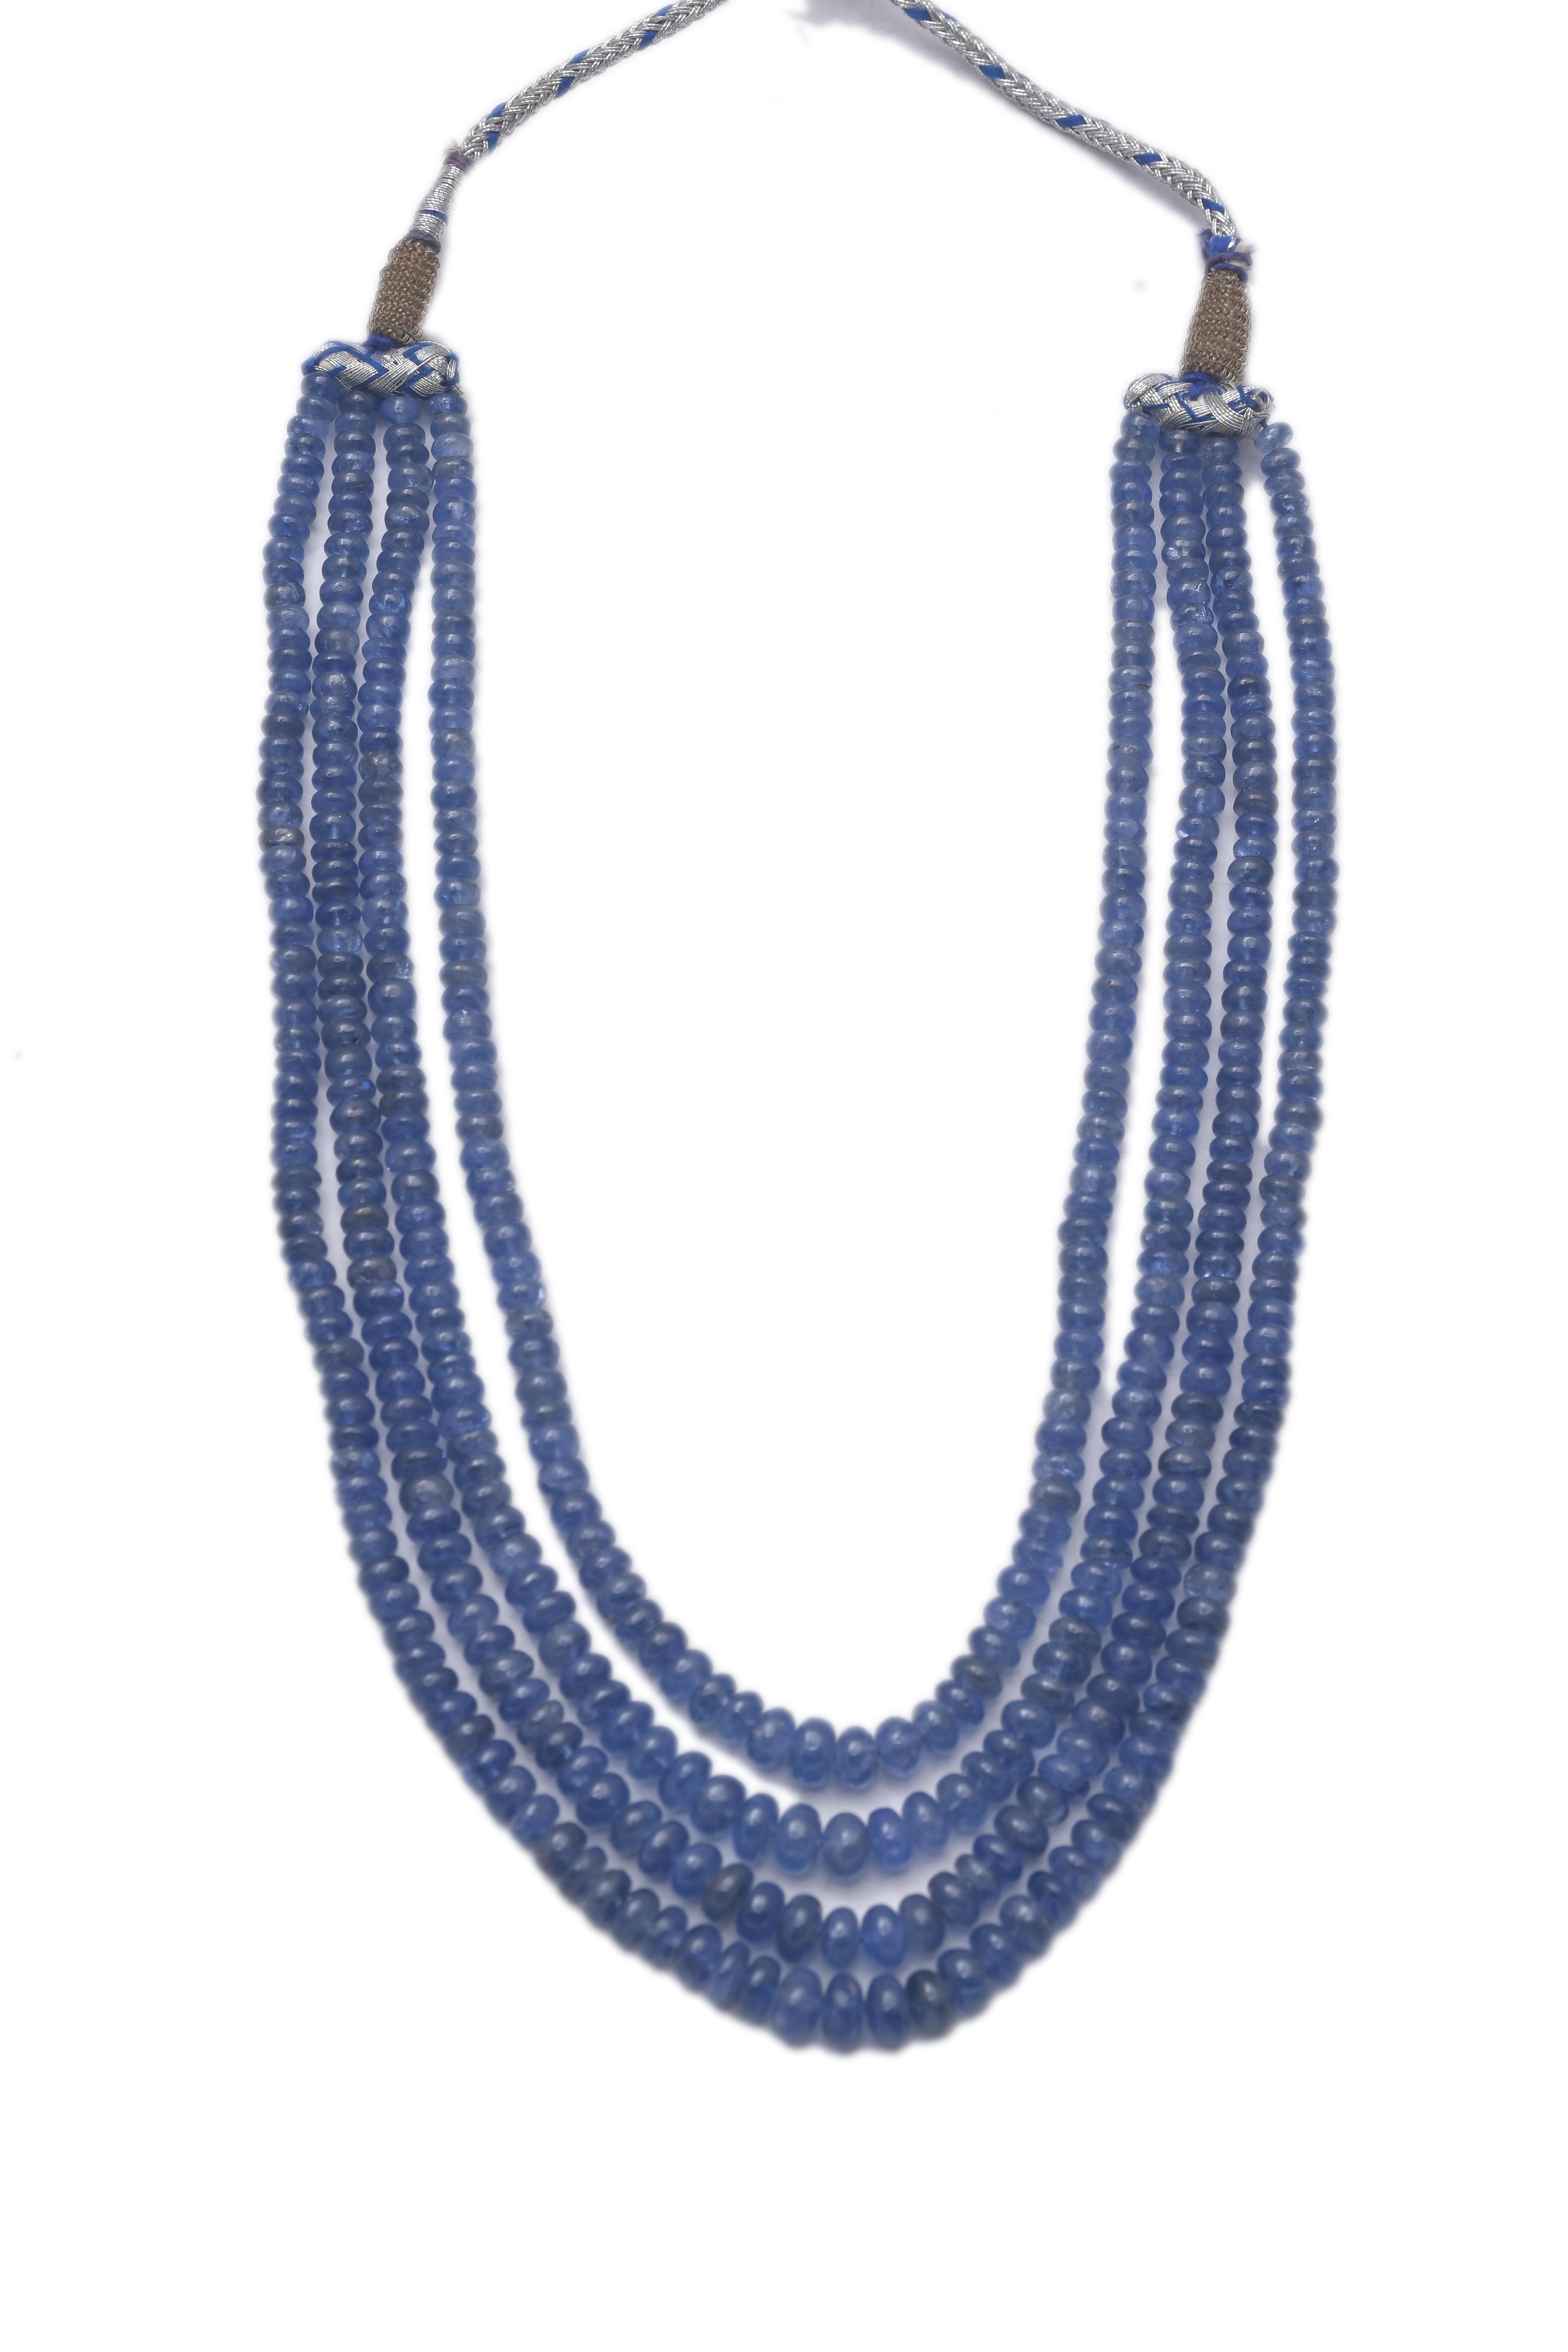 Blue sapphire string necklace